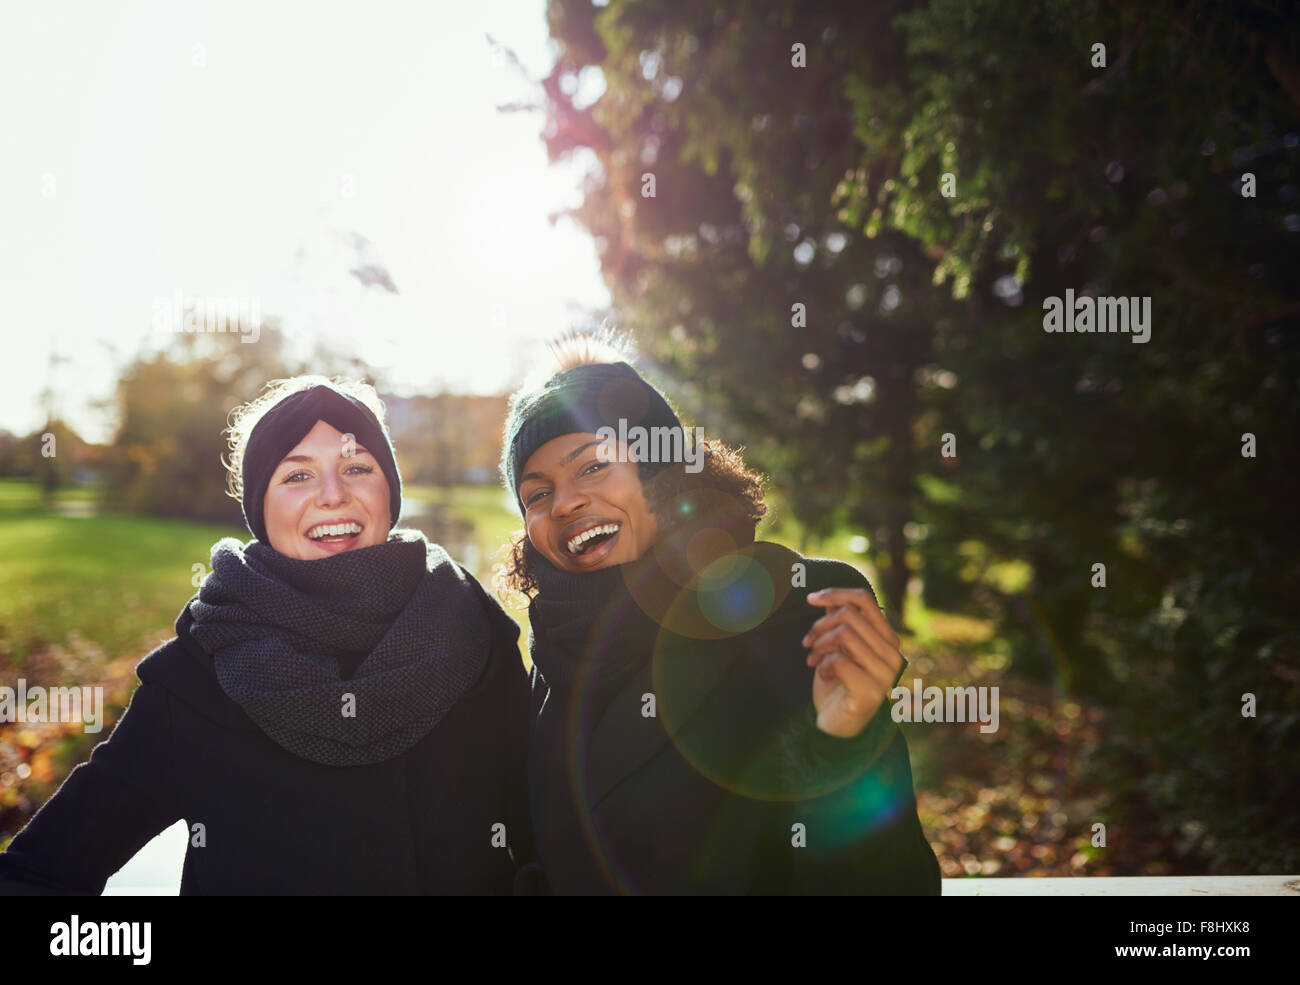 Two smiling women standing on bridge in park.Sunny Stock Photo